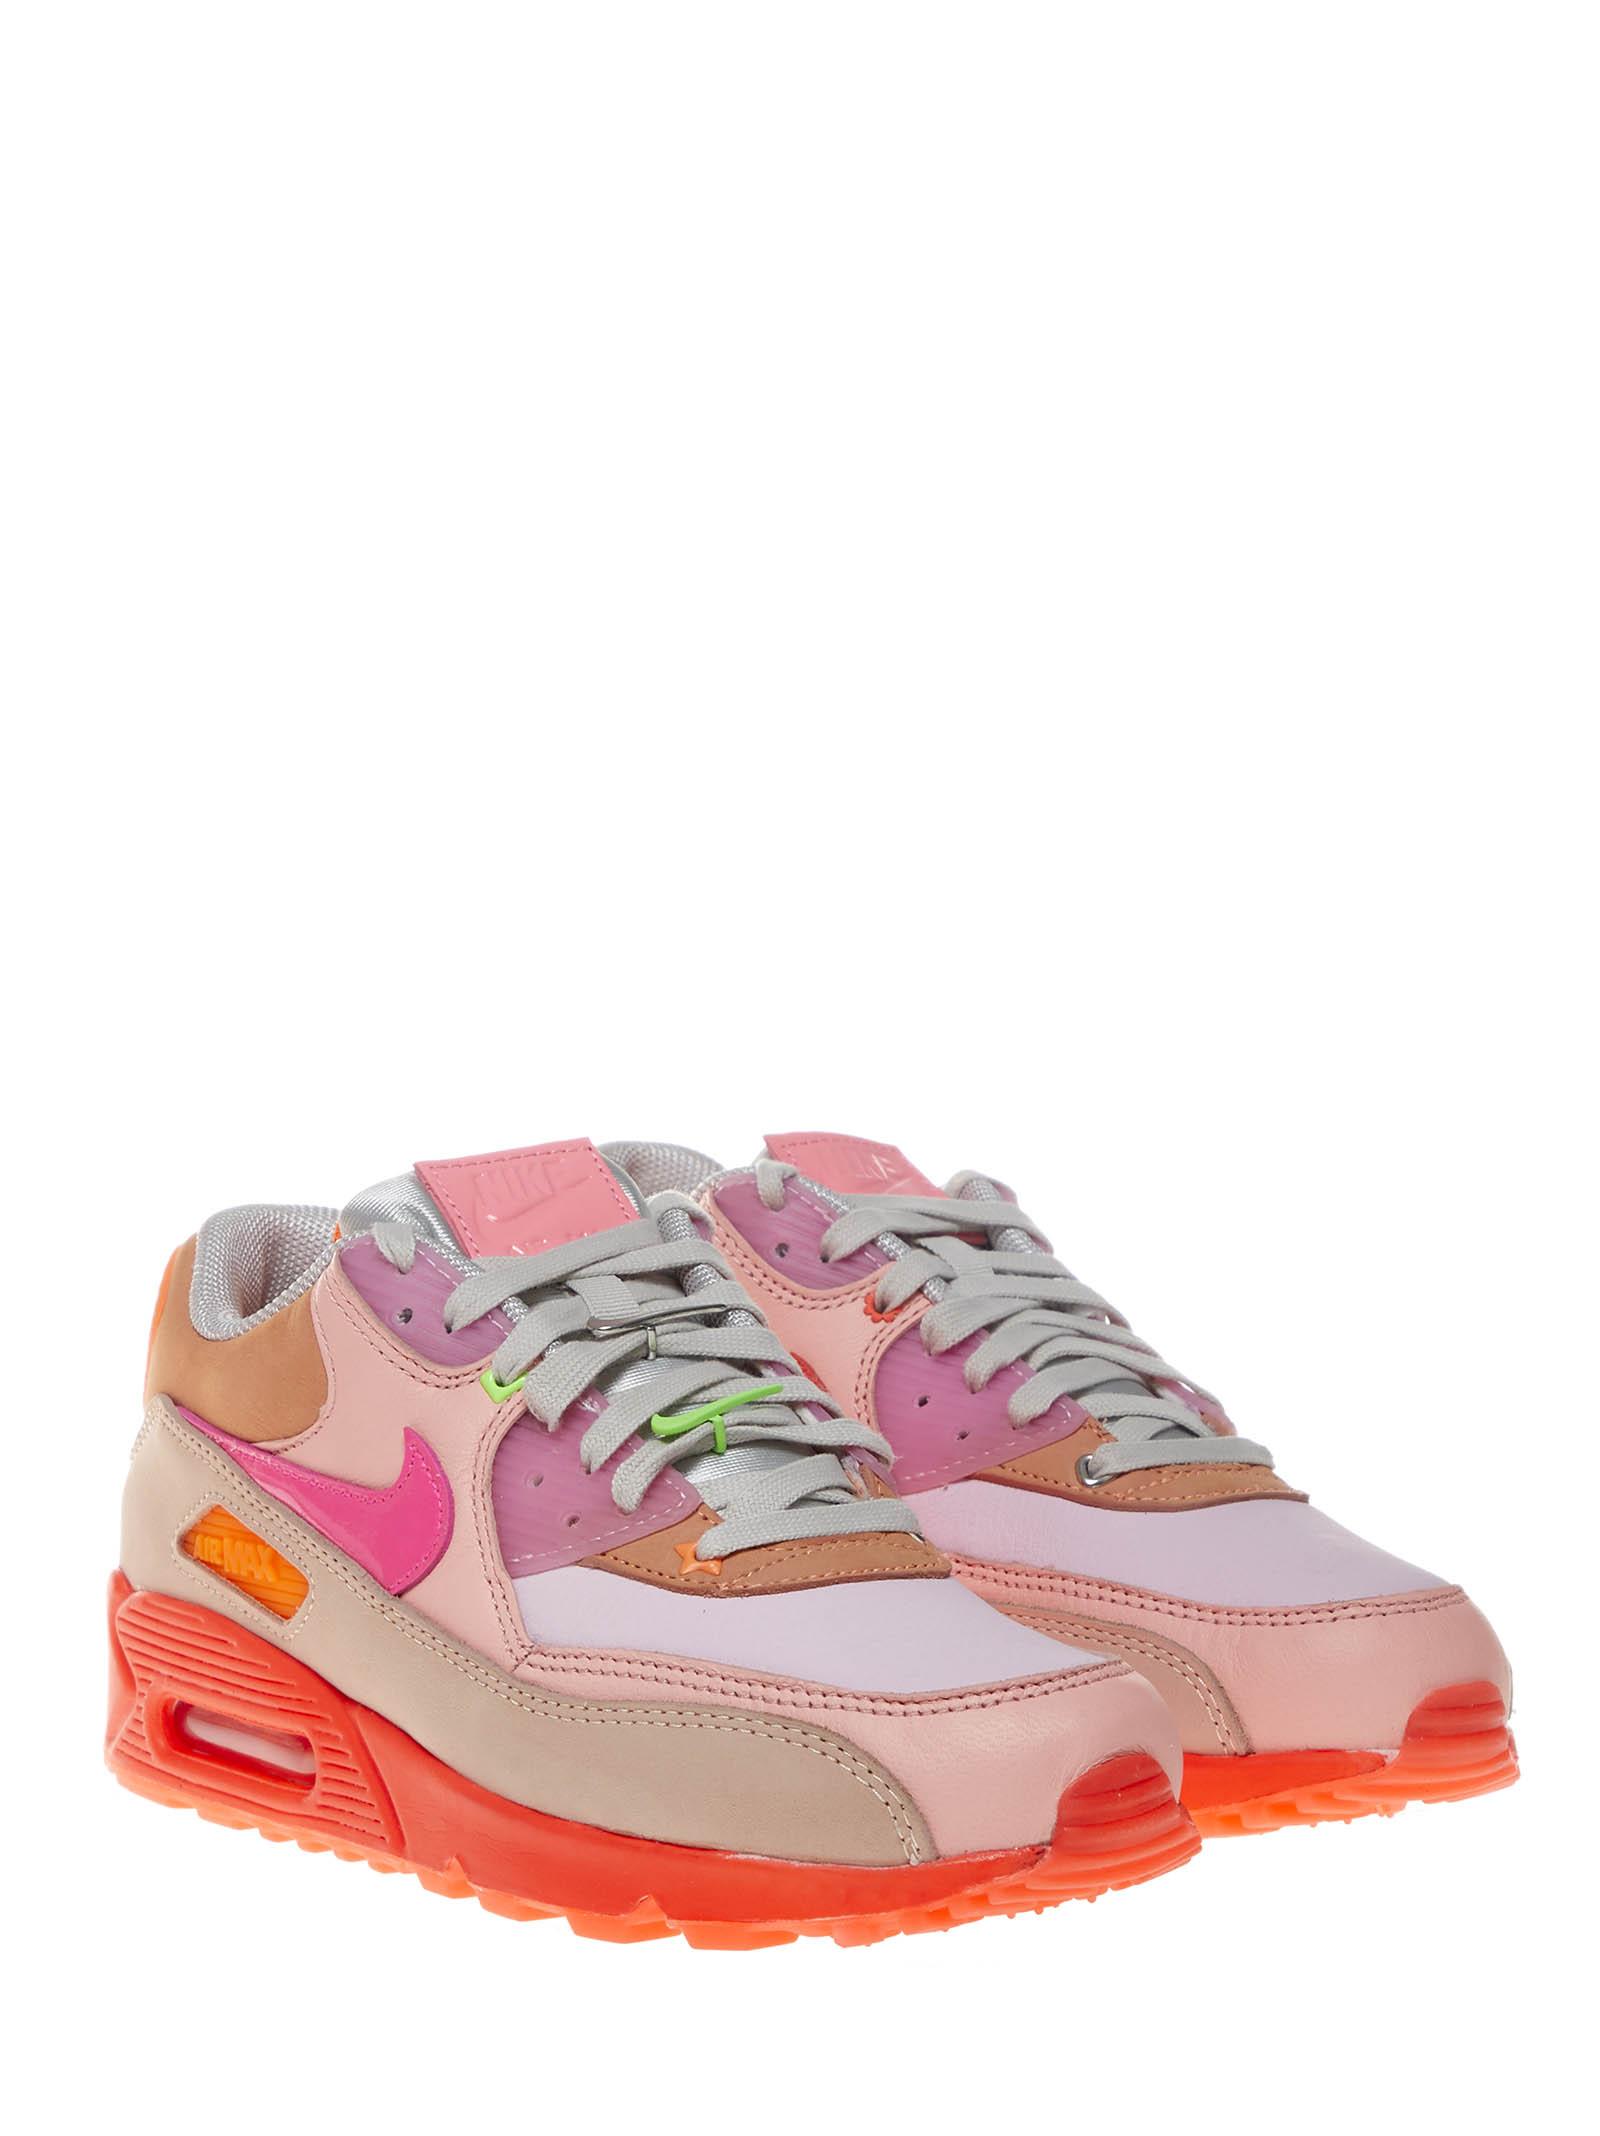 Nike Leather Pink And Orange Air Max 90 Sneakers With Layered Design And  Integrated Air Technology. | Lyst Canada